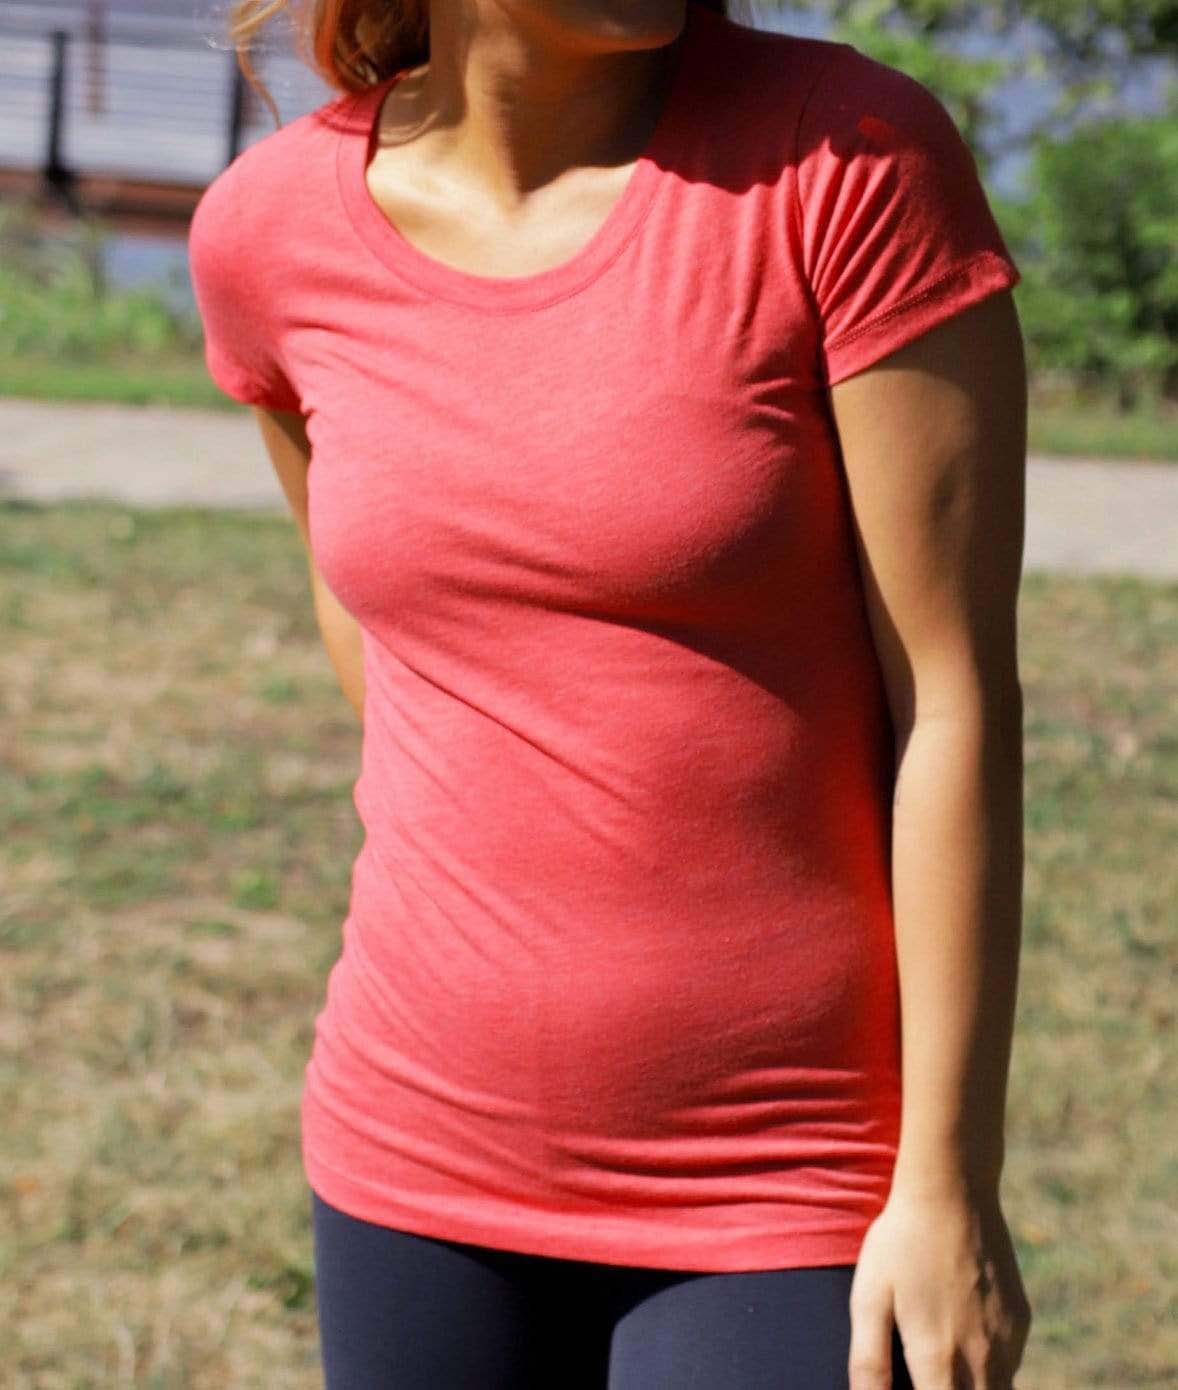 Women's Ridiculously Soft Lightweight Scoop-Neck T-Shirt Worn by Model